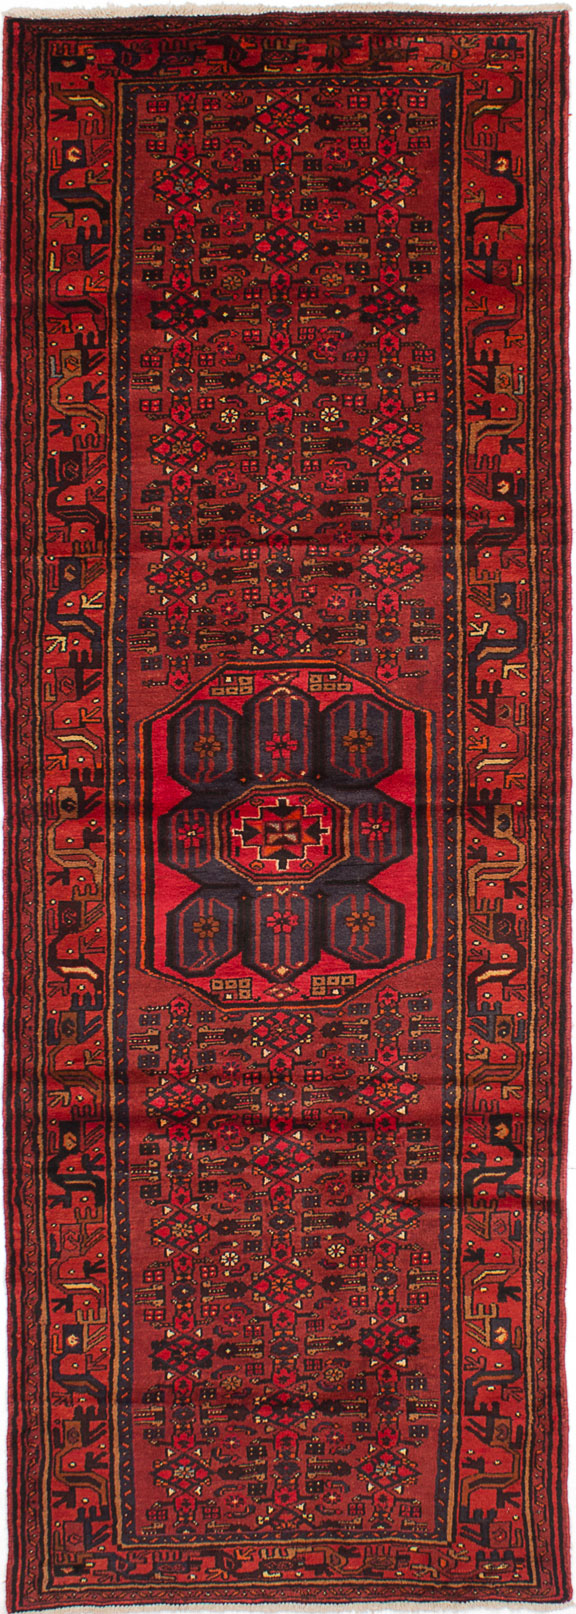 Hand-knotted Hamadan Red Wool Rug 3'5" x 10'1"  Size: 3'5" x 10'1"  